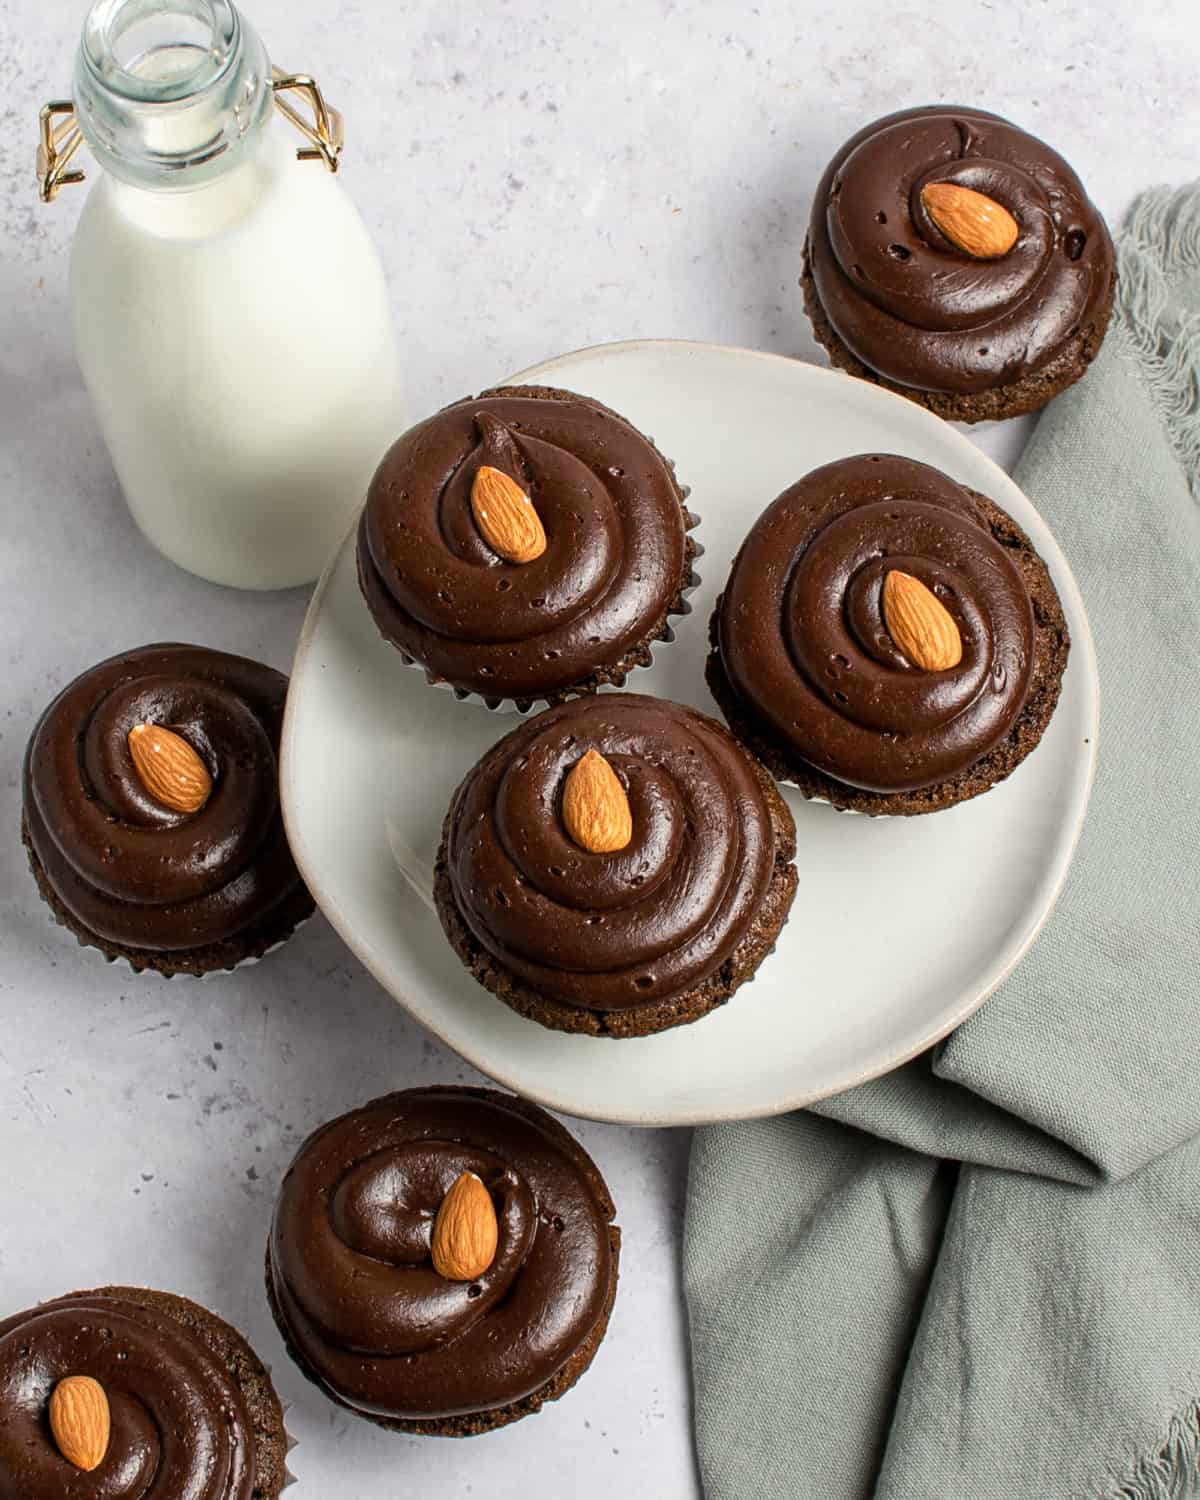 An overhead shot of cupcakes topped with almonds and a glass of milk.